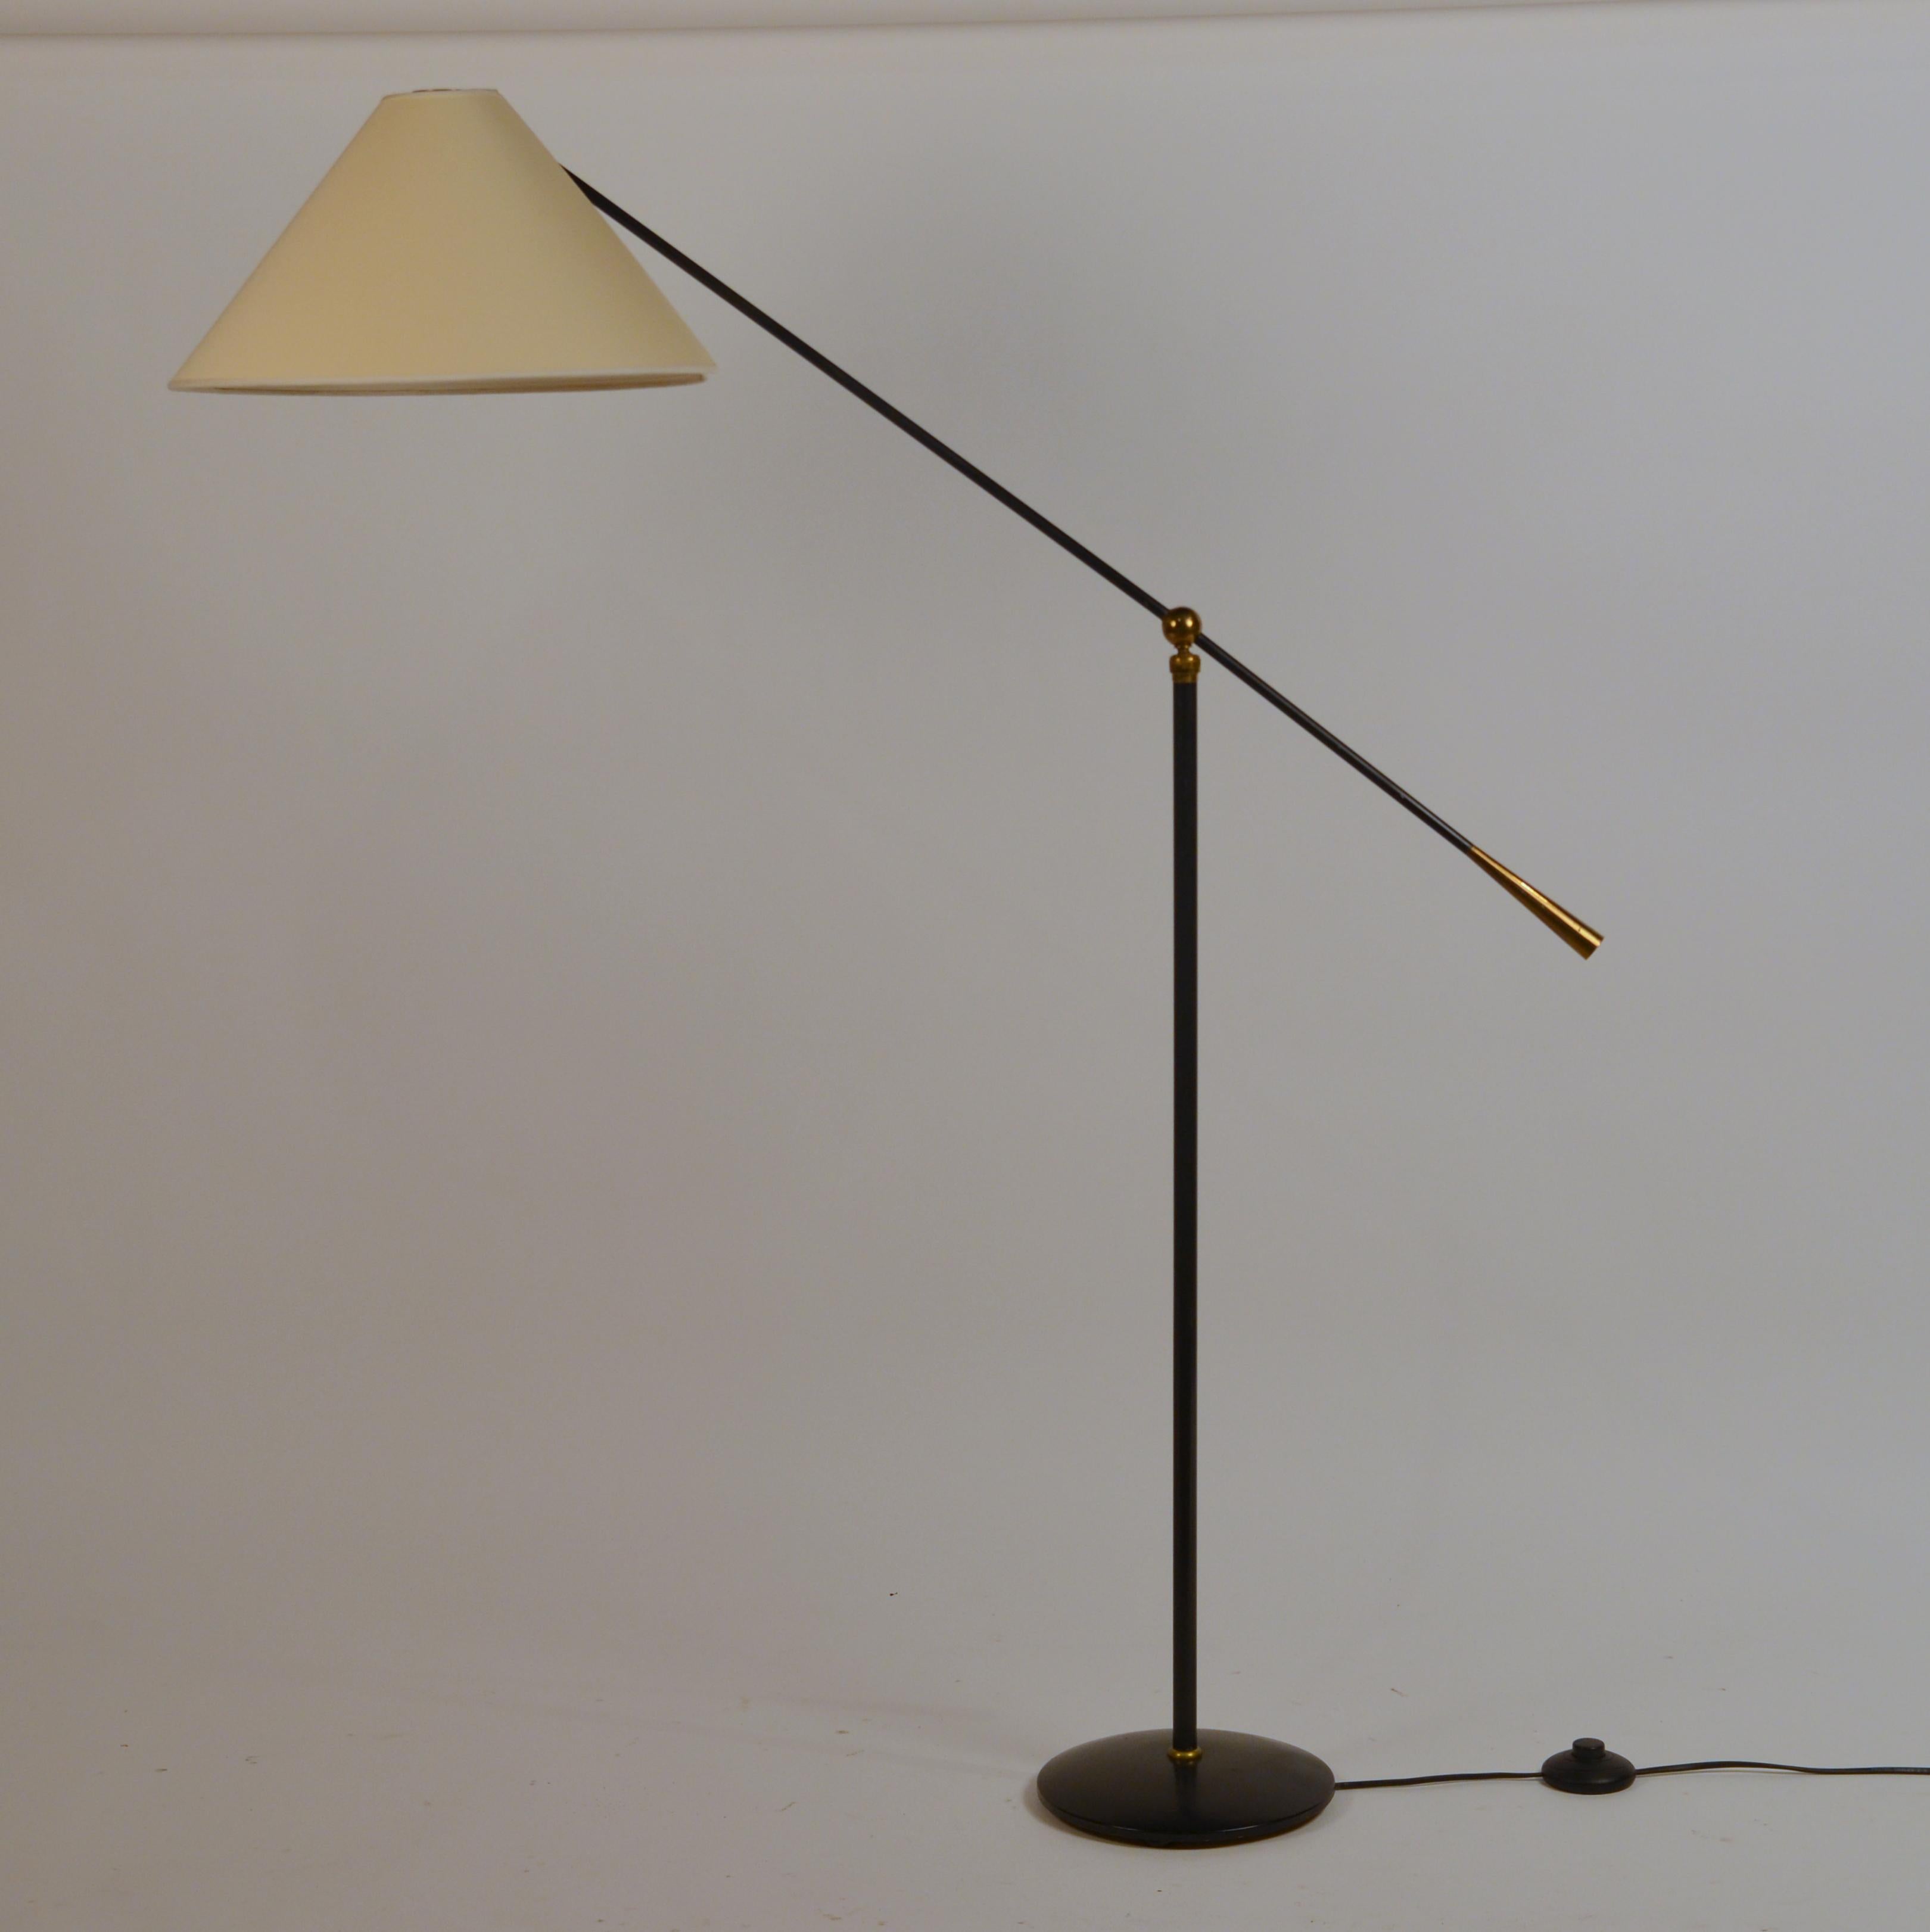 Chic French 1950s articulated floor Lamp by Maison Lunel. Great reading lamp next to an armchair or a sofa.